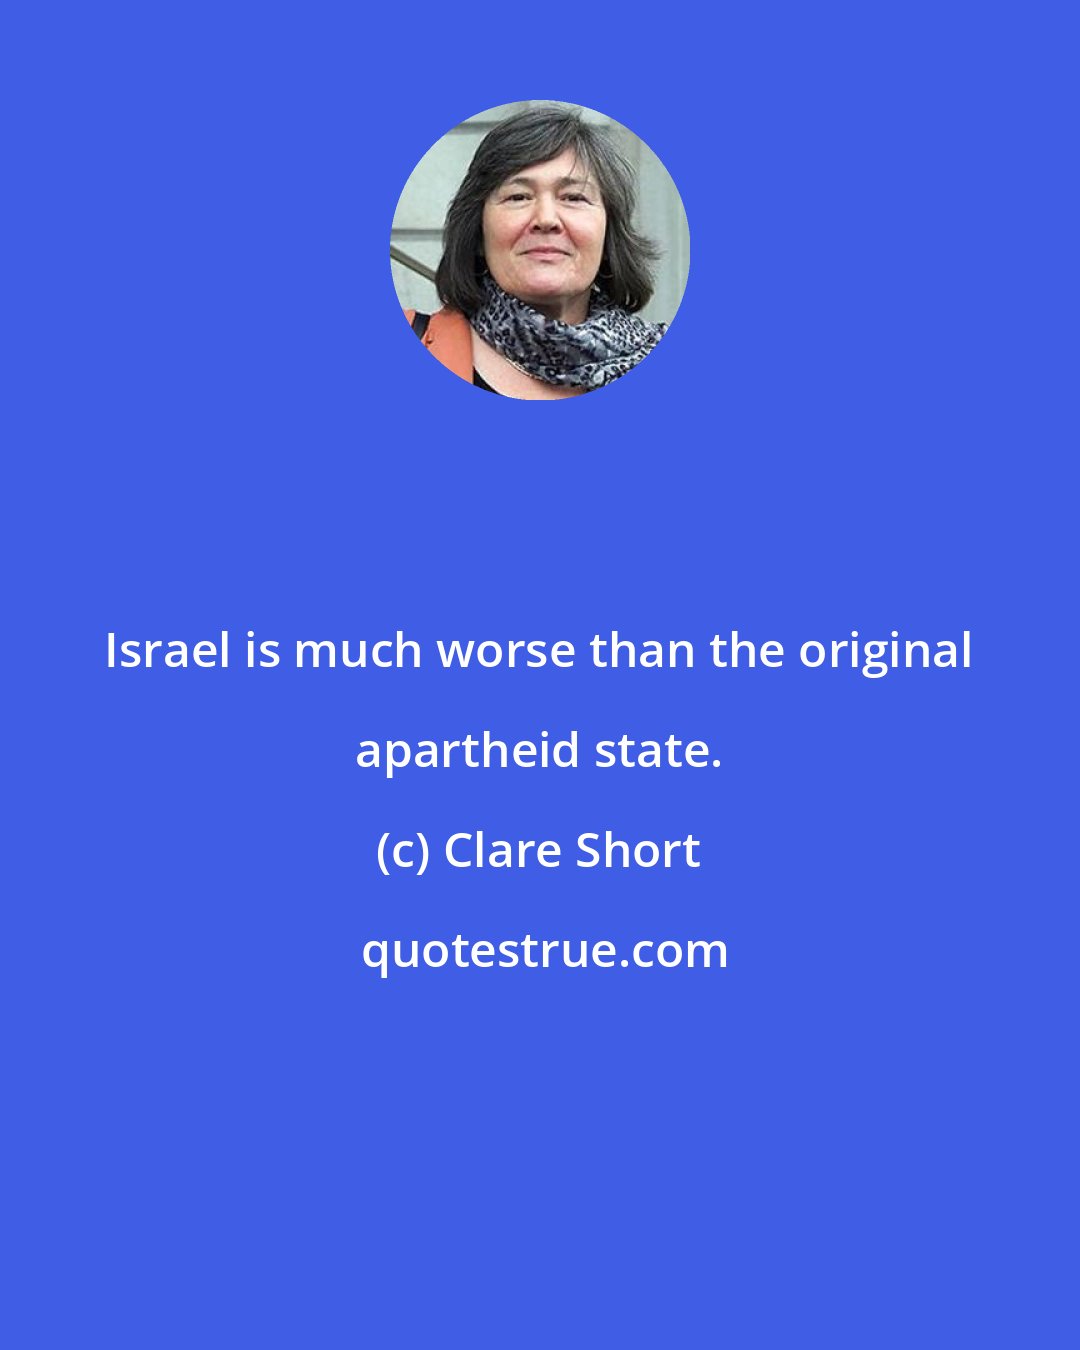 Clare Short: Israel is much worse than the original apartheid state.